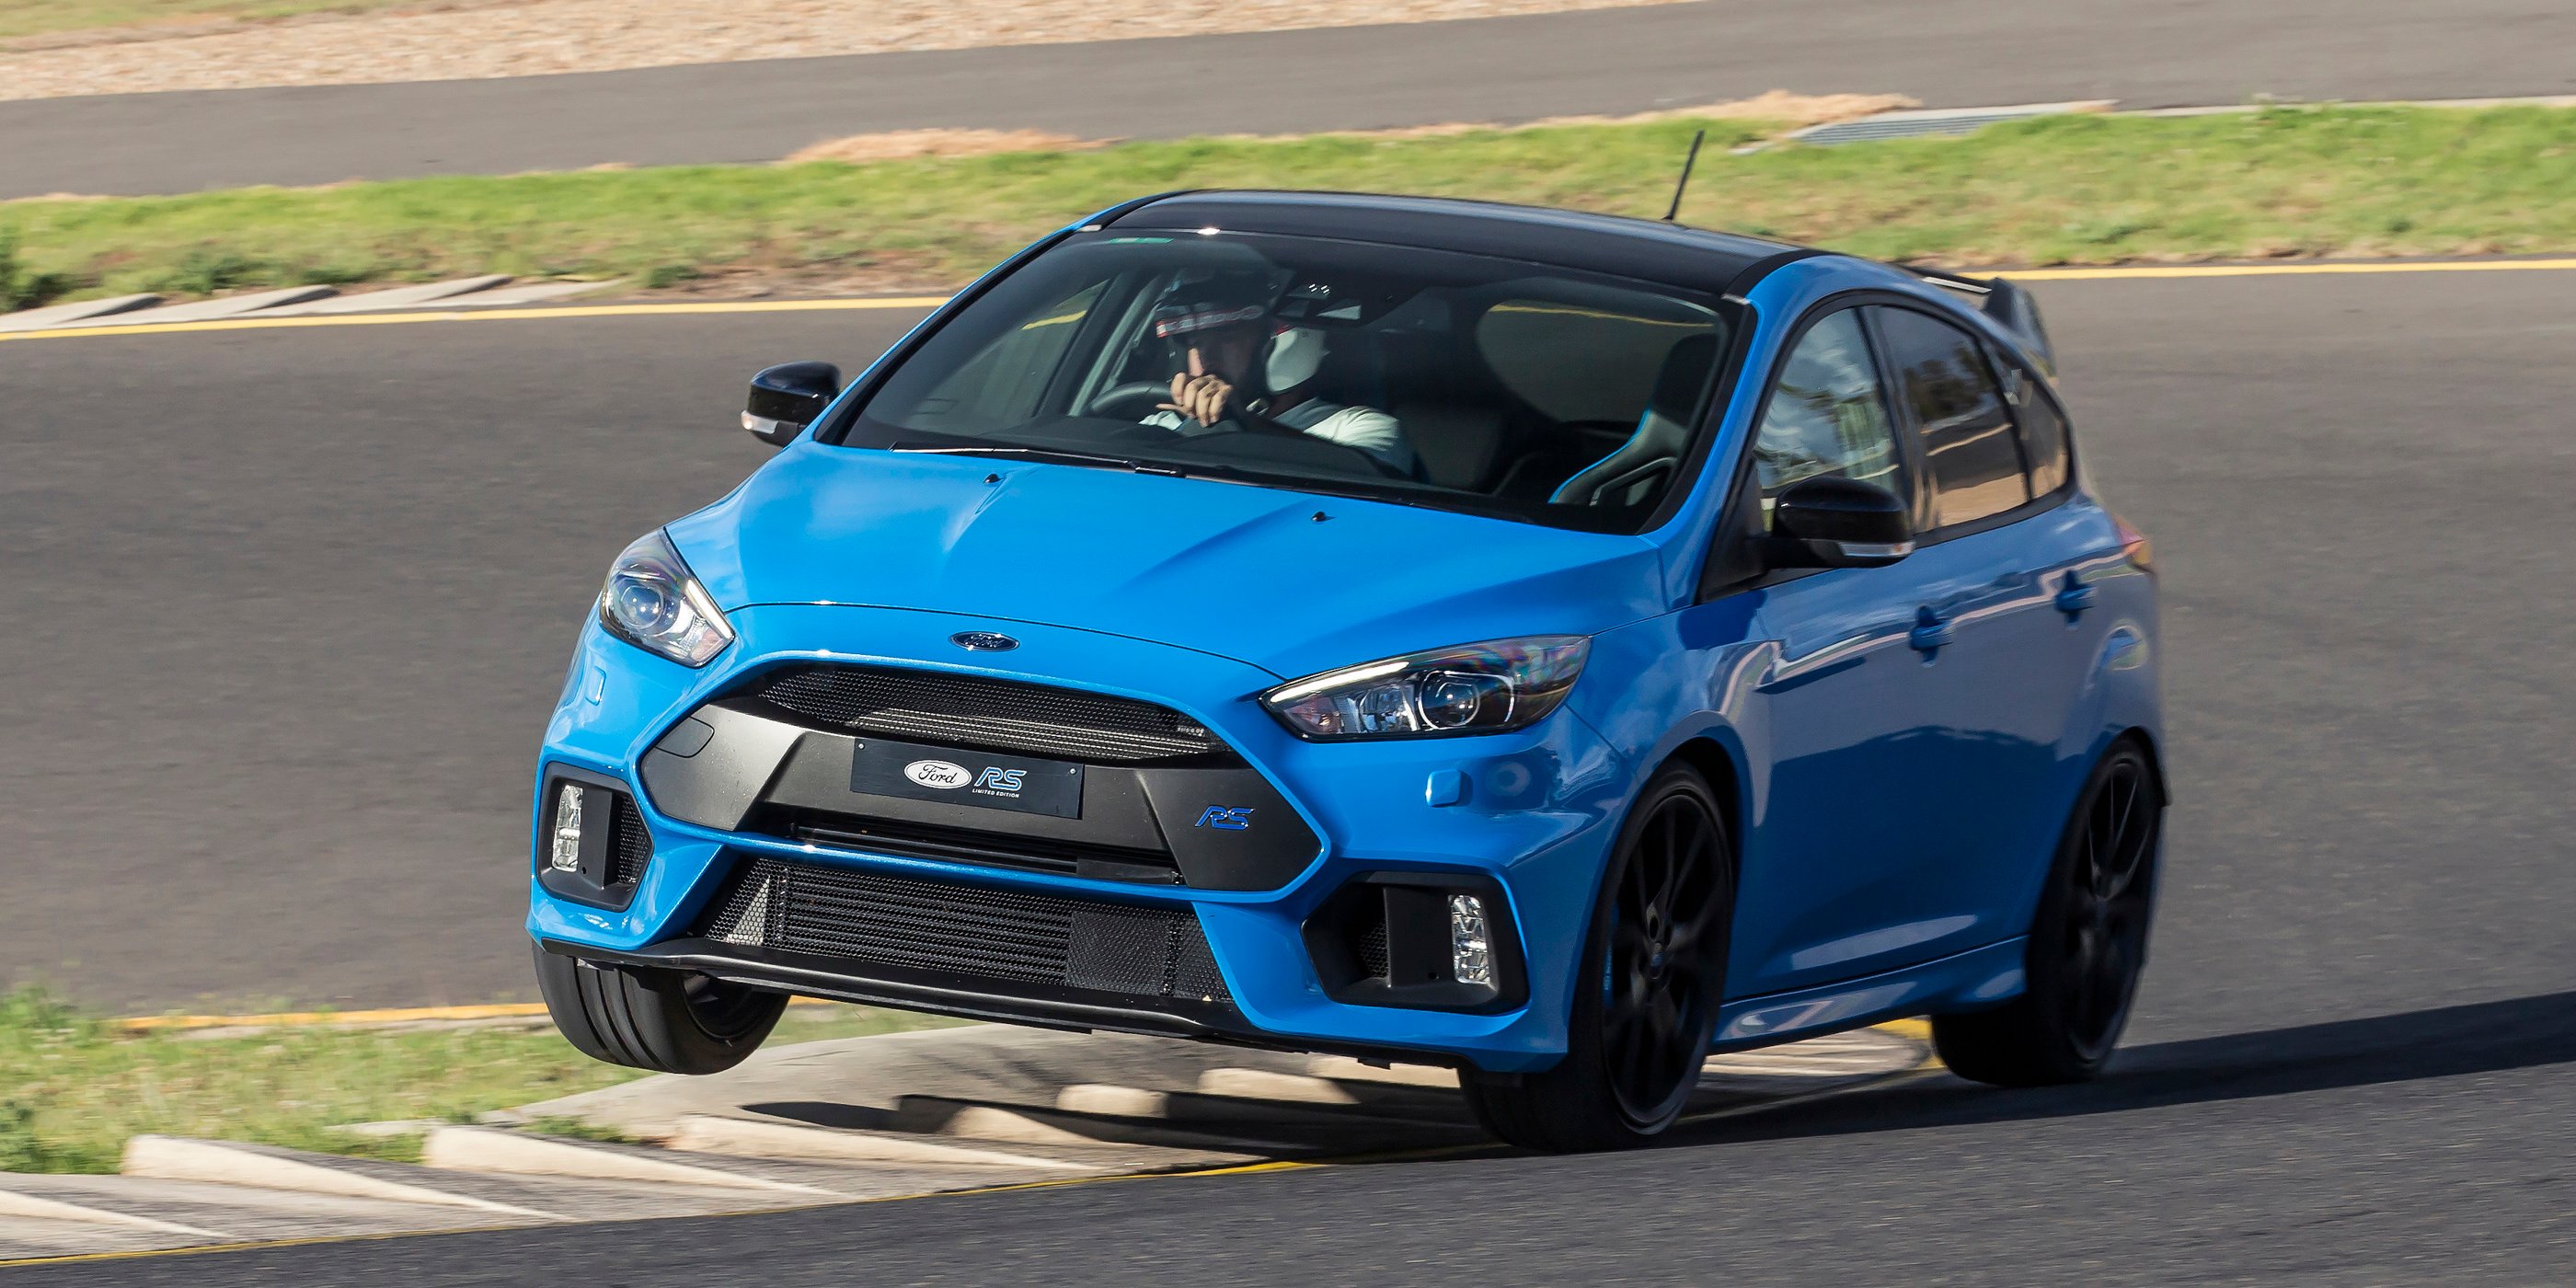 2018 Ford Focus Rs | 2017, 2018, 2019 Ford Price, Release ...